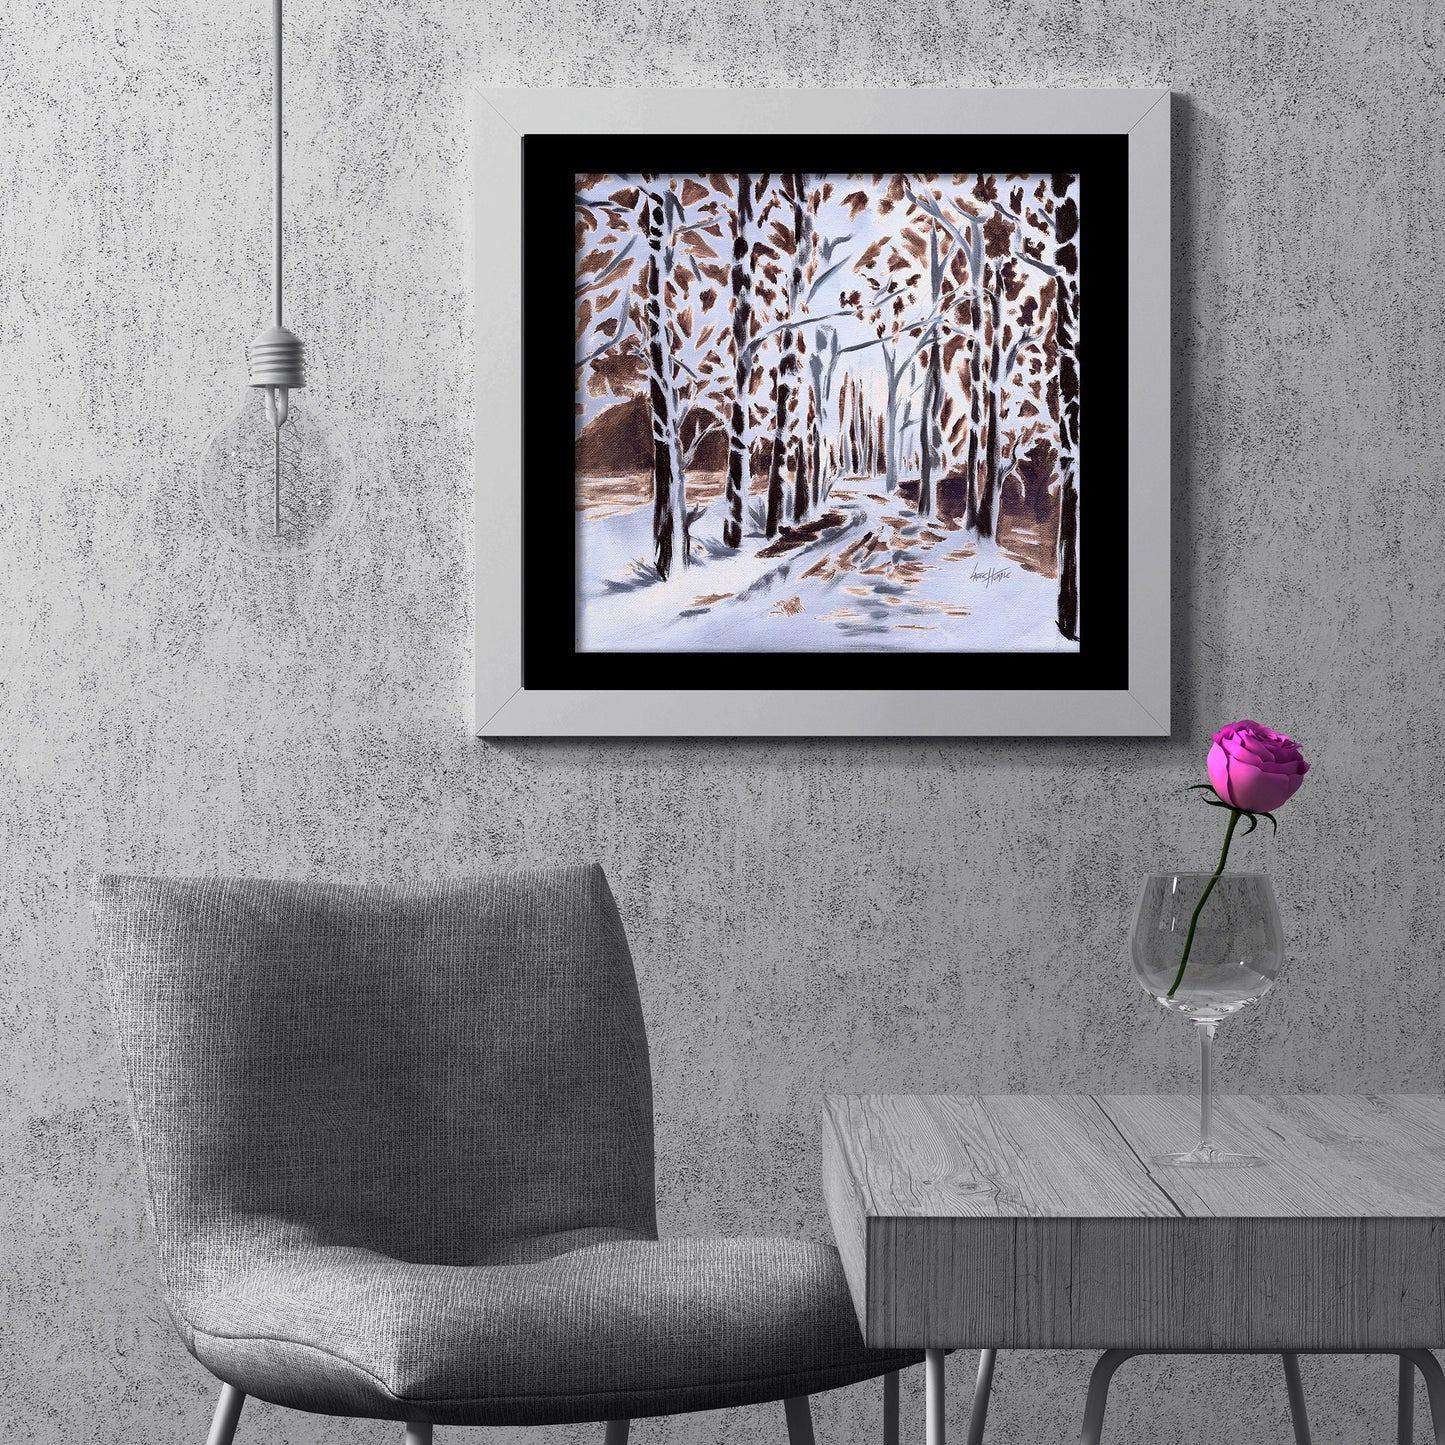 Snowy Landscape, Above Bed Decor, Canvas print, Oil Painting, Rustic Home Decor, Large Wall Art